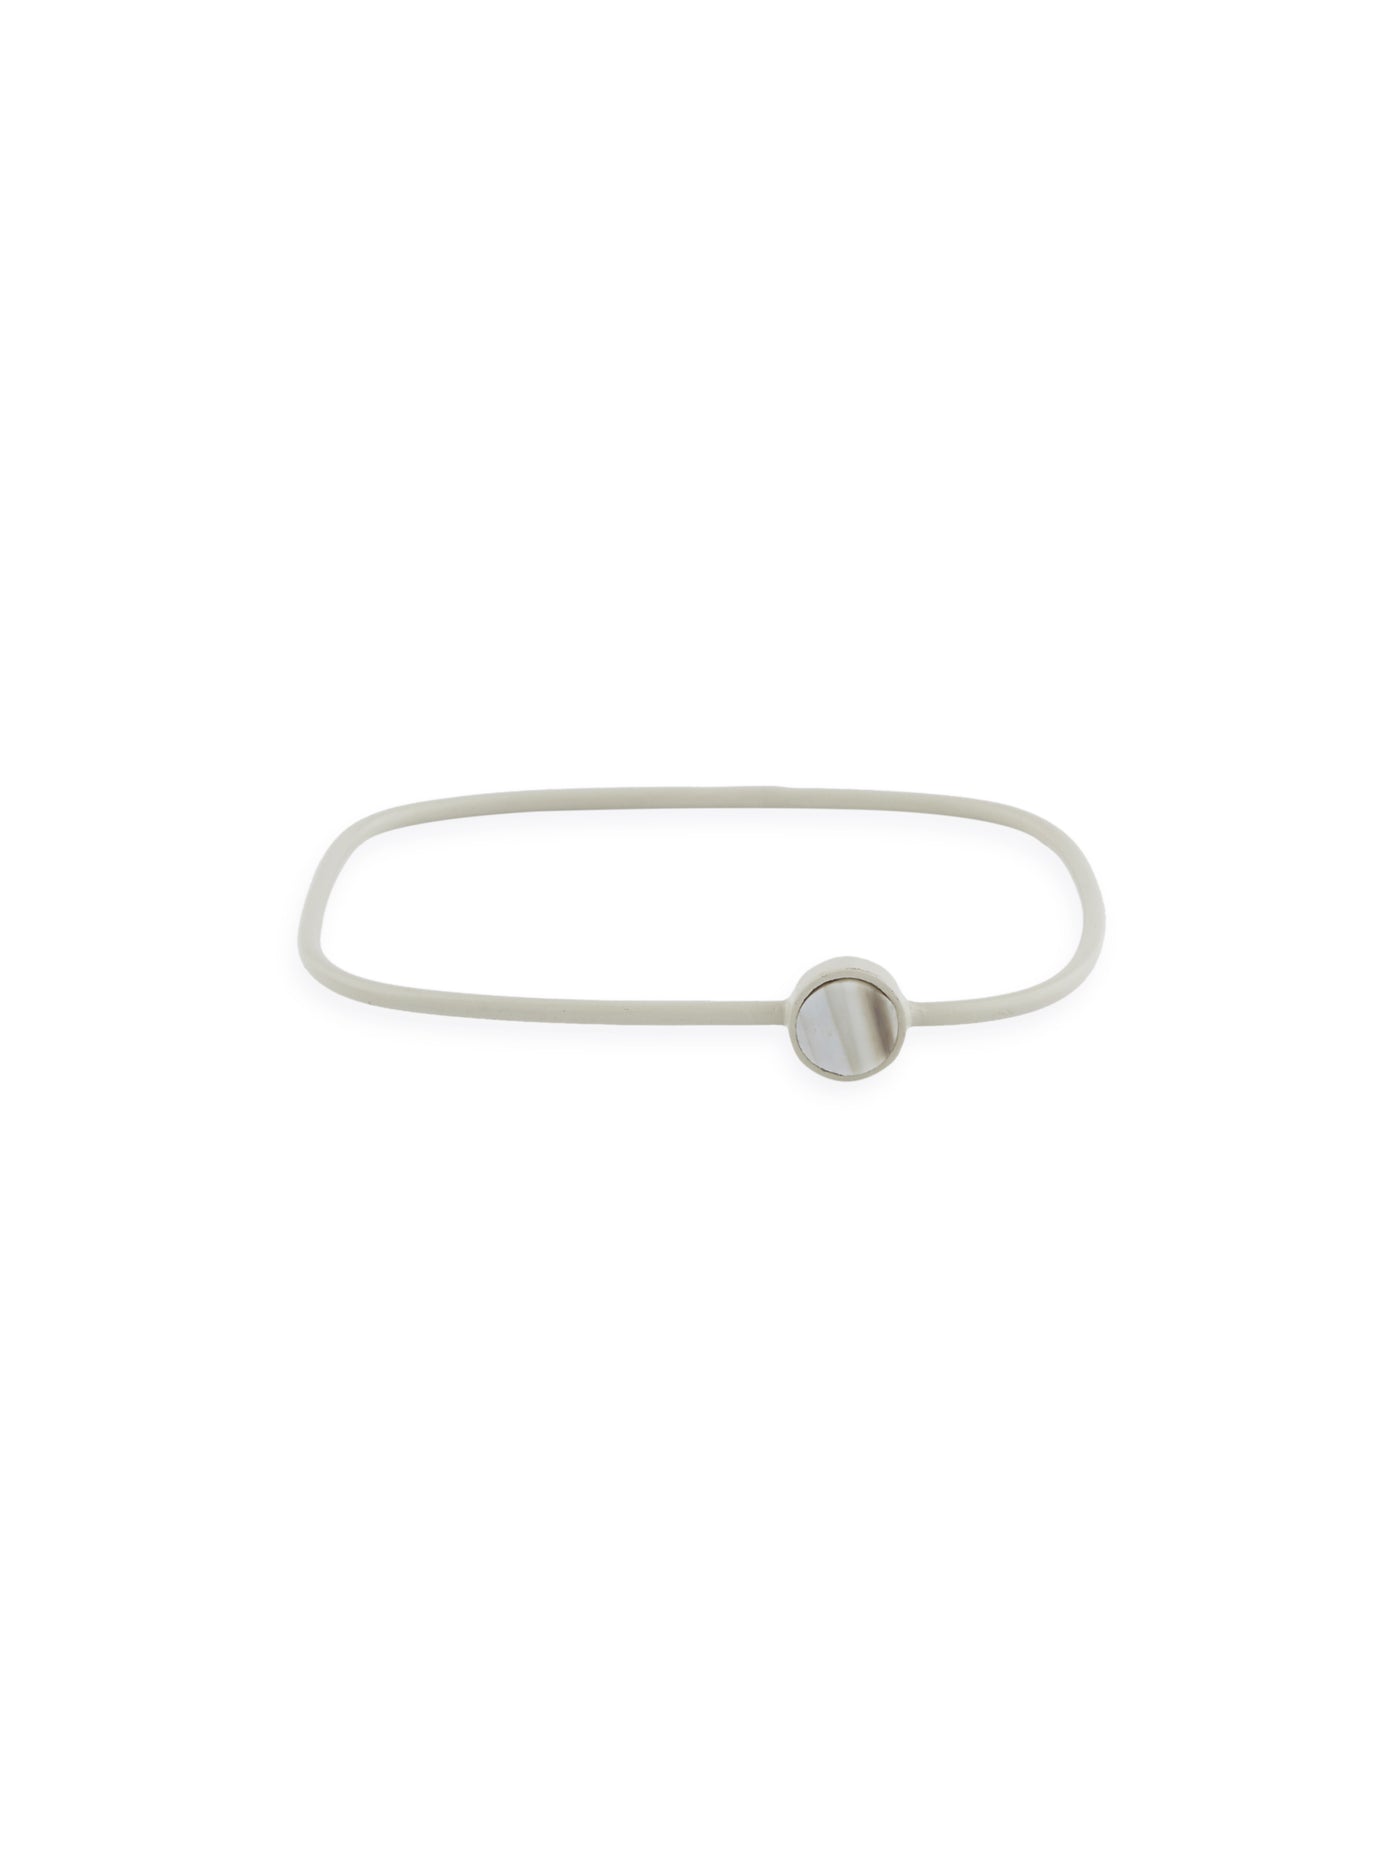 square shaped grey bangle with a circle shaped charm on it.